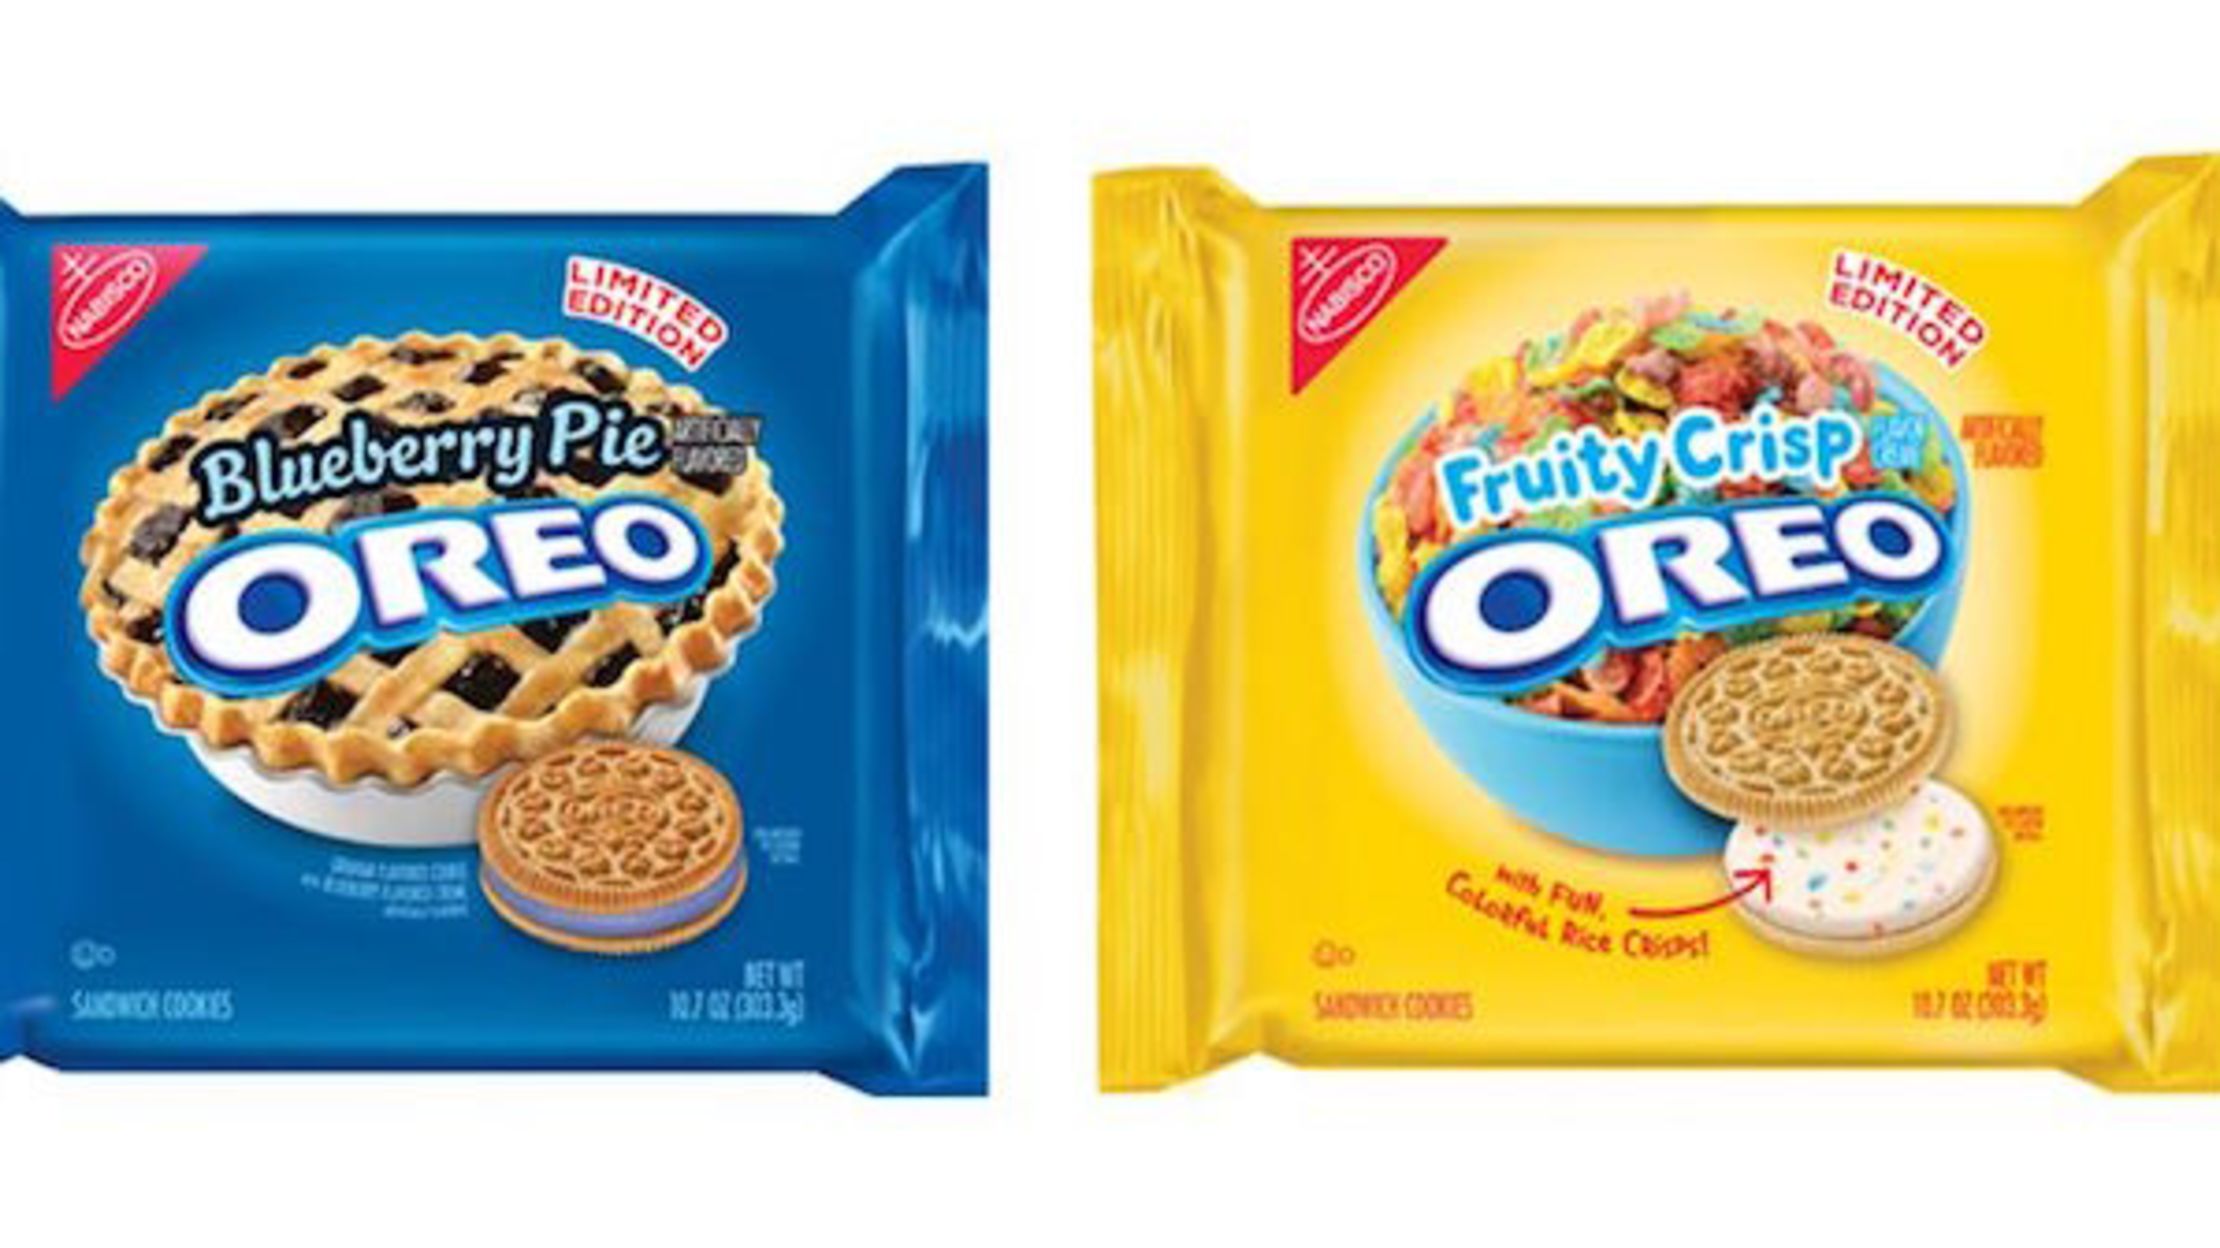 Oreo Unveils New Limited Edition Blueberry Pie and Fruity Crisp Flavors